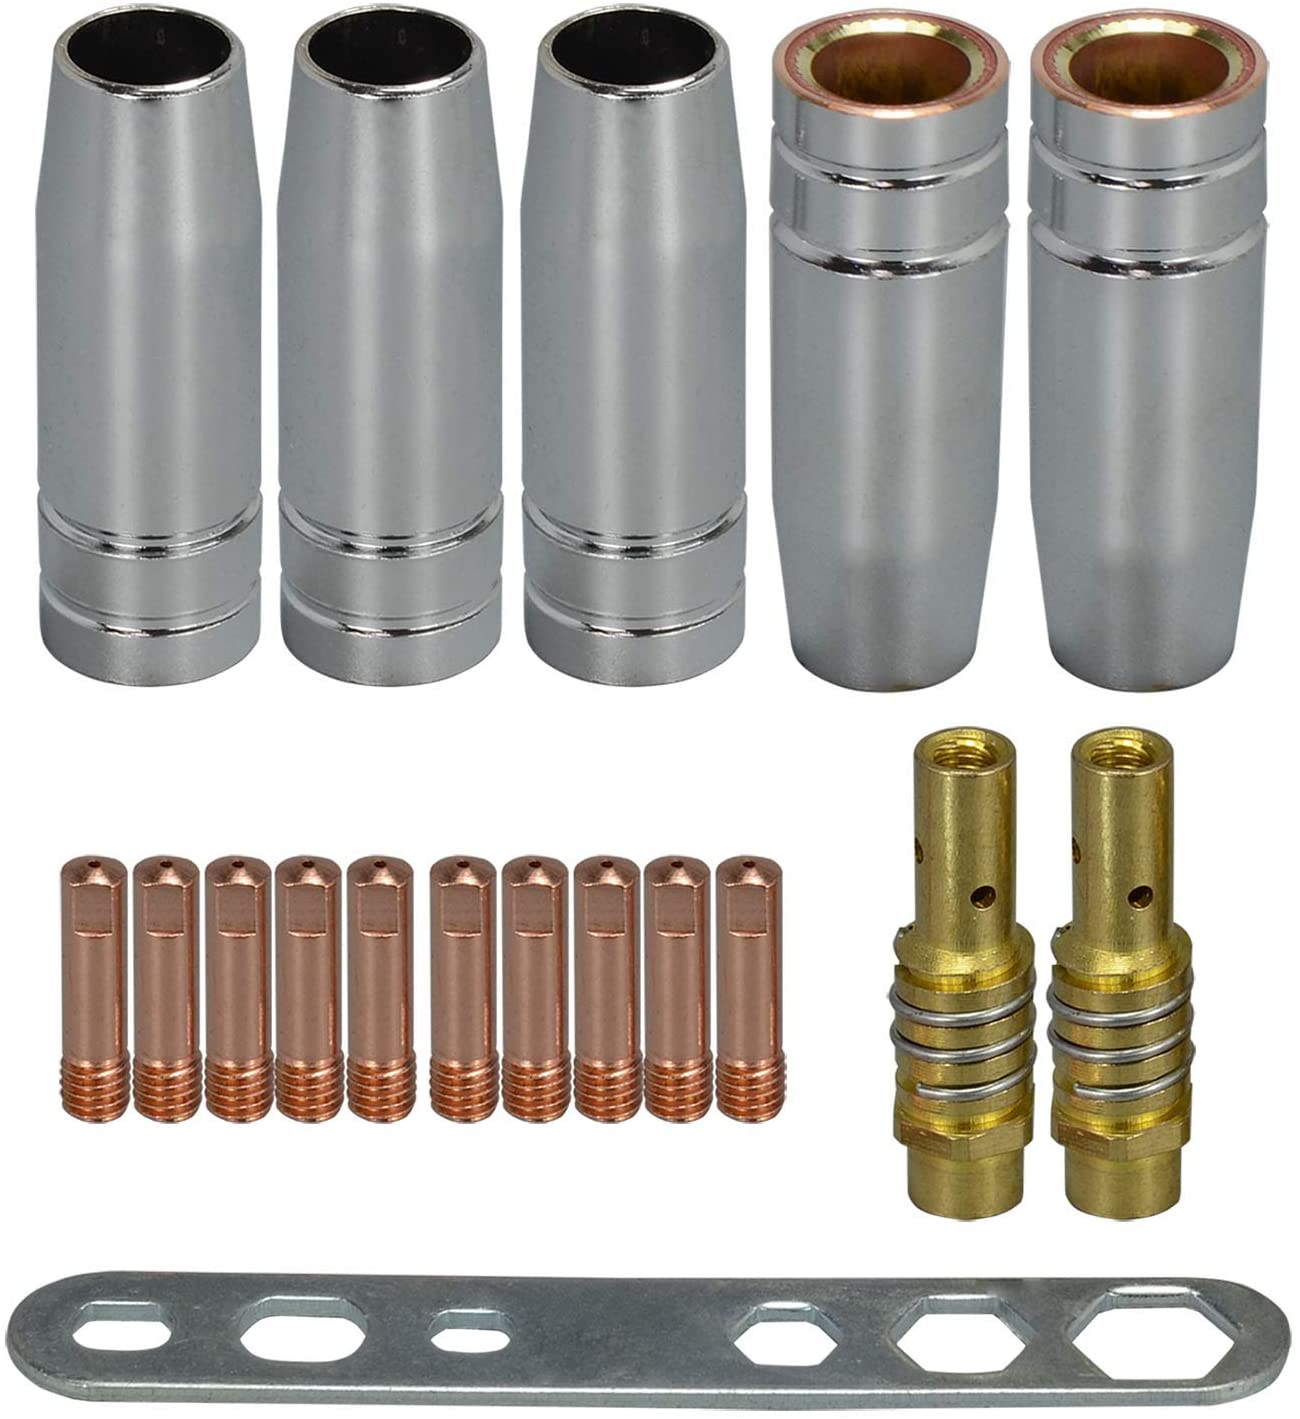 MB15 15AK Contact Tip .045'' 1.2mm M6 & Tips Holder Difuser & Shield cup For MB15 15AK MIG Welding Torch 18pk